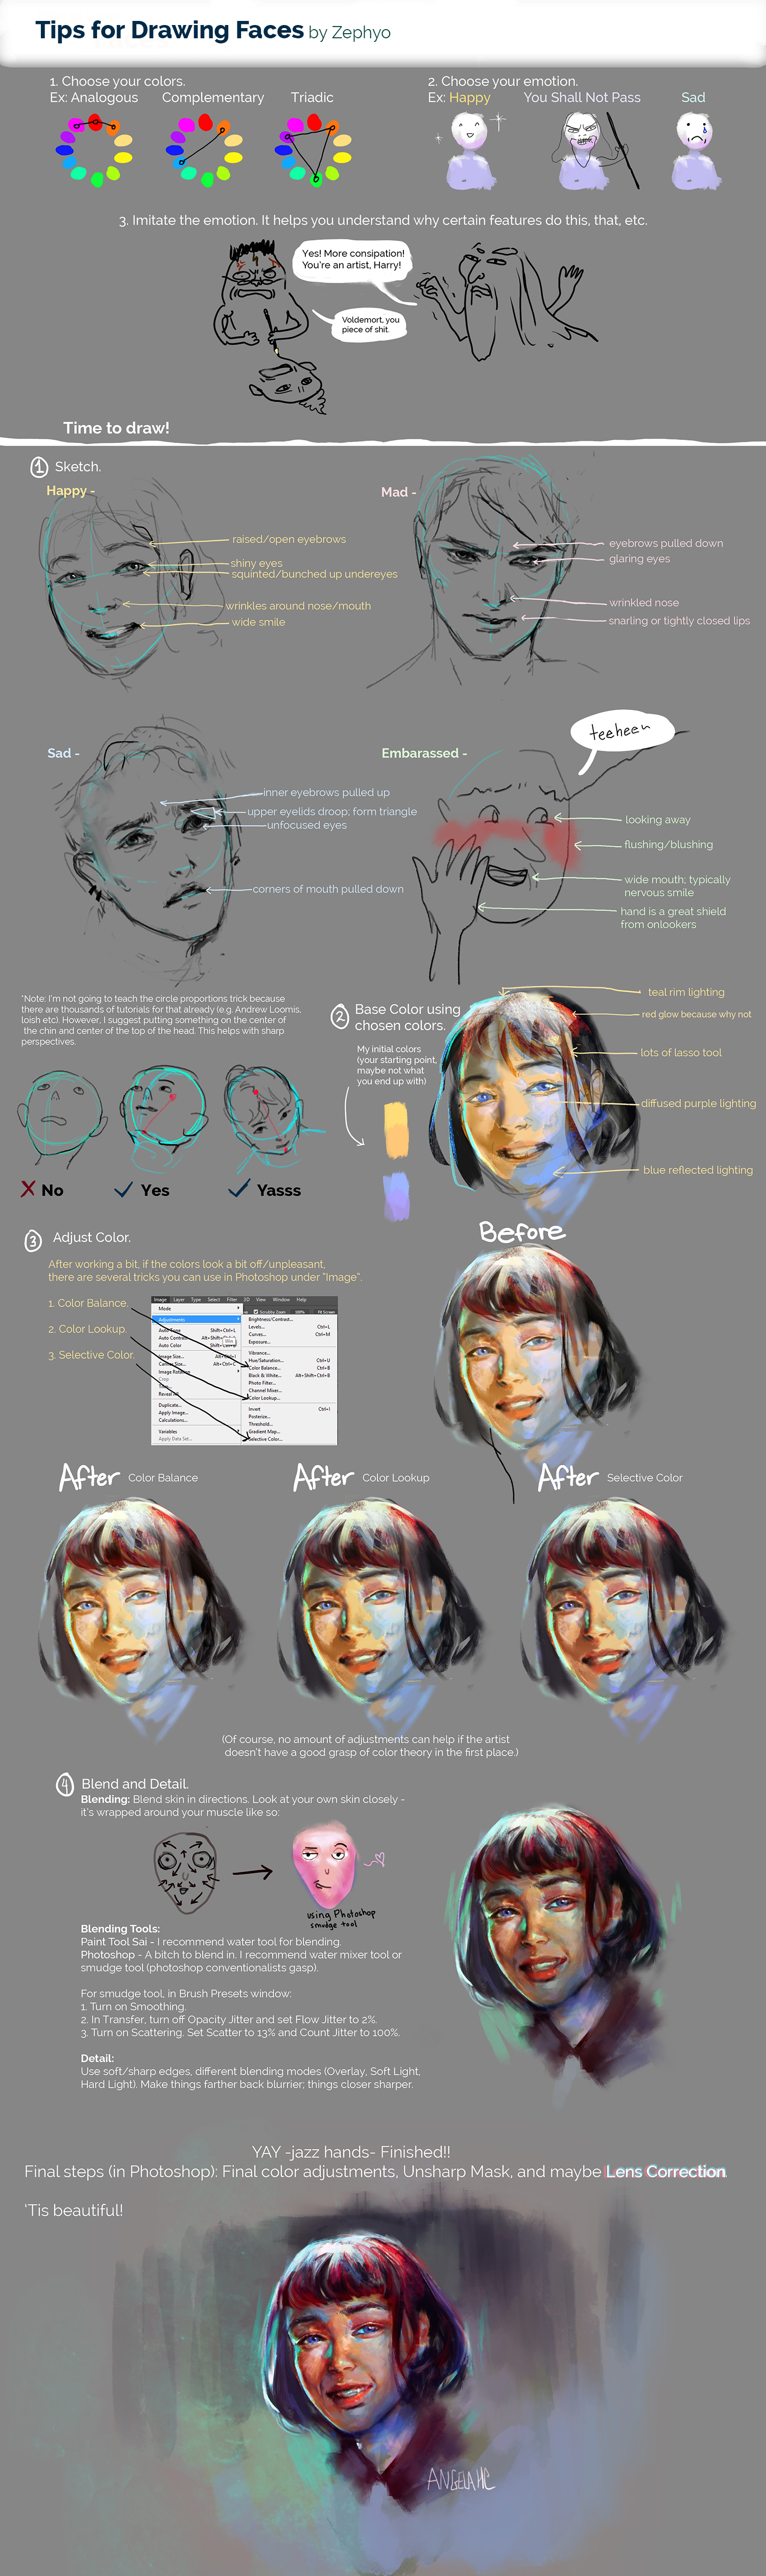 Tips for Drawing Faces